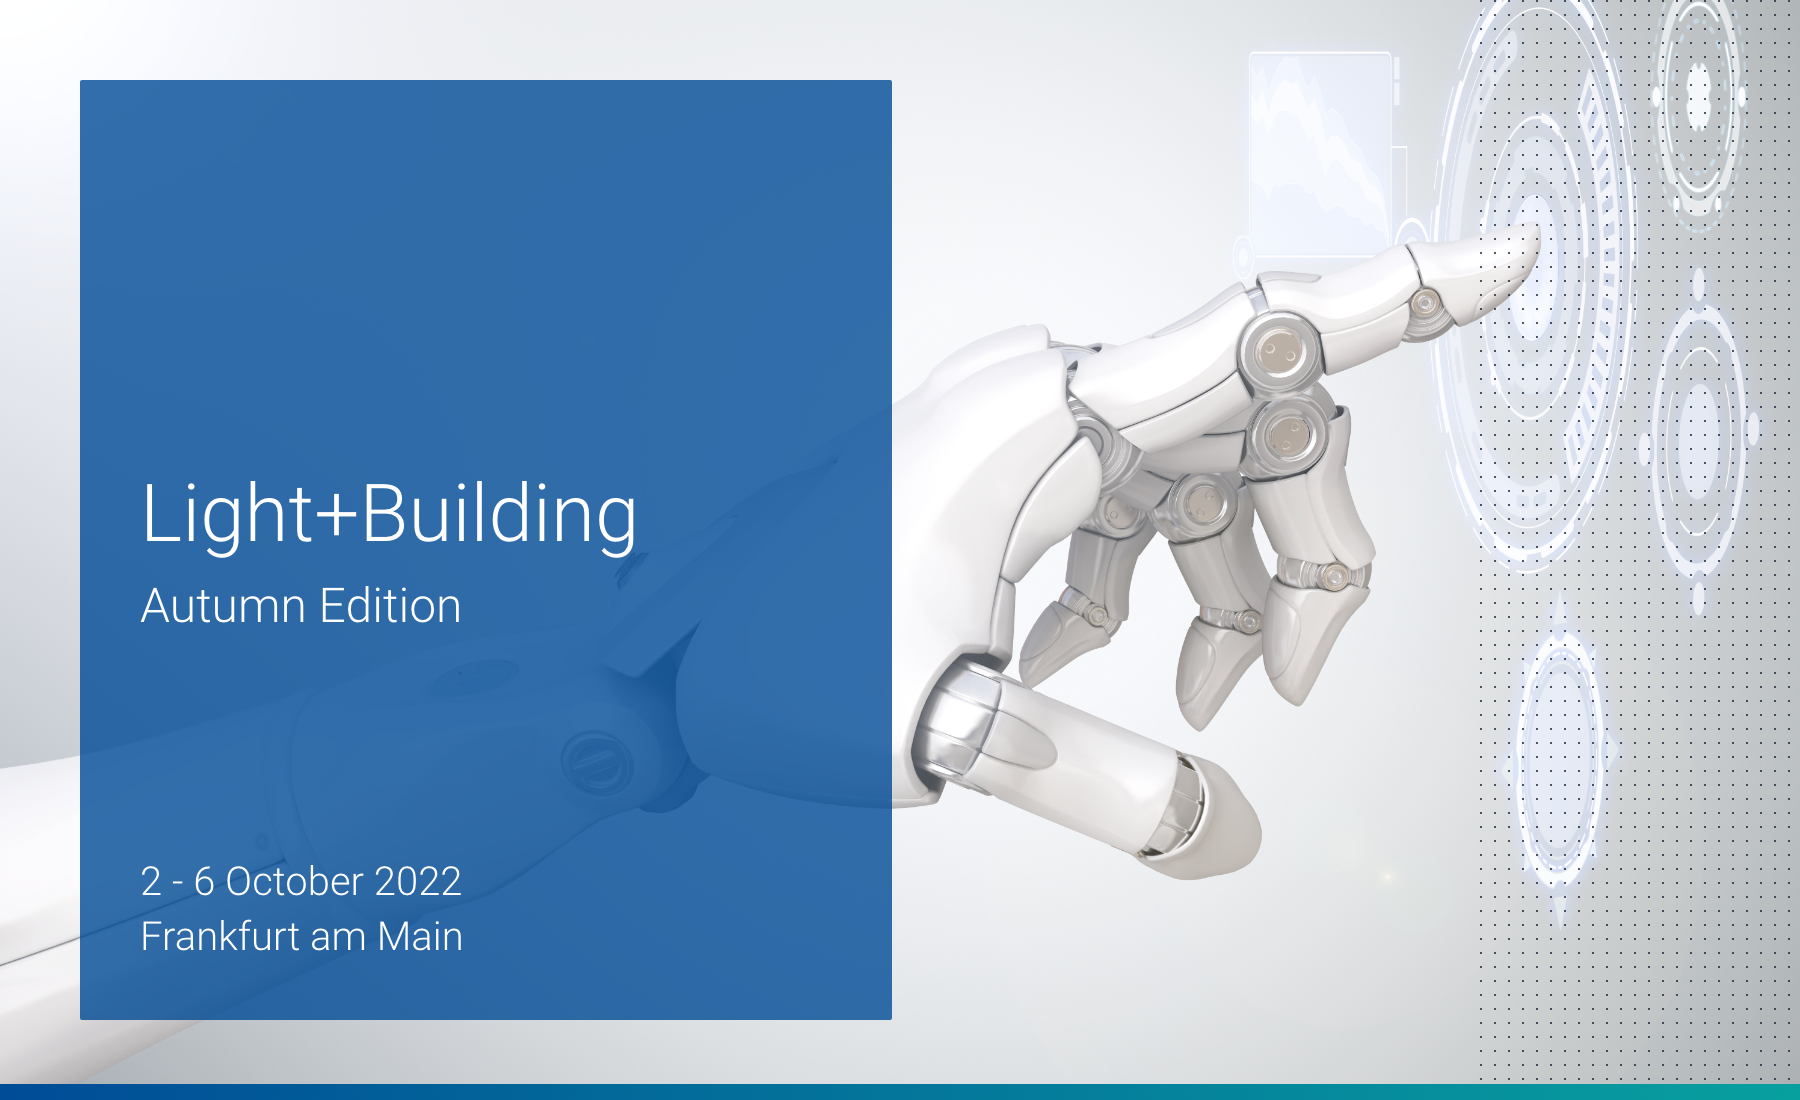 CELUS will be part of light + building 2022